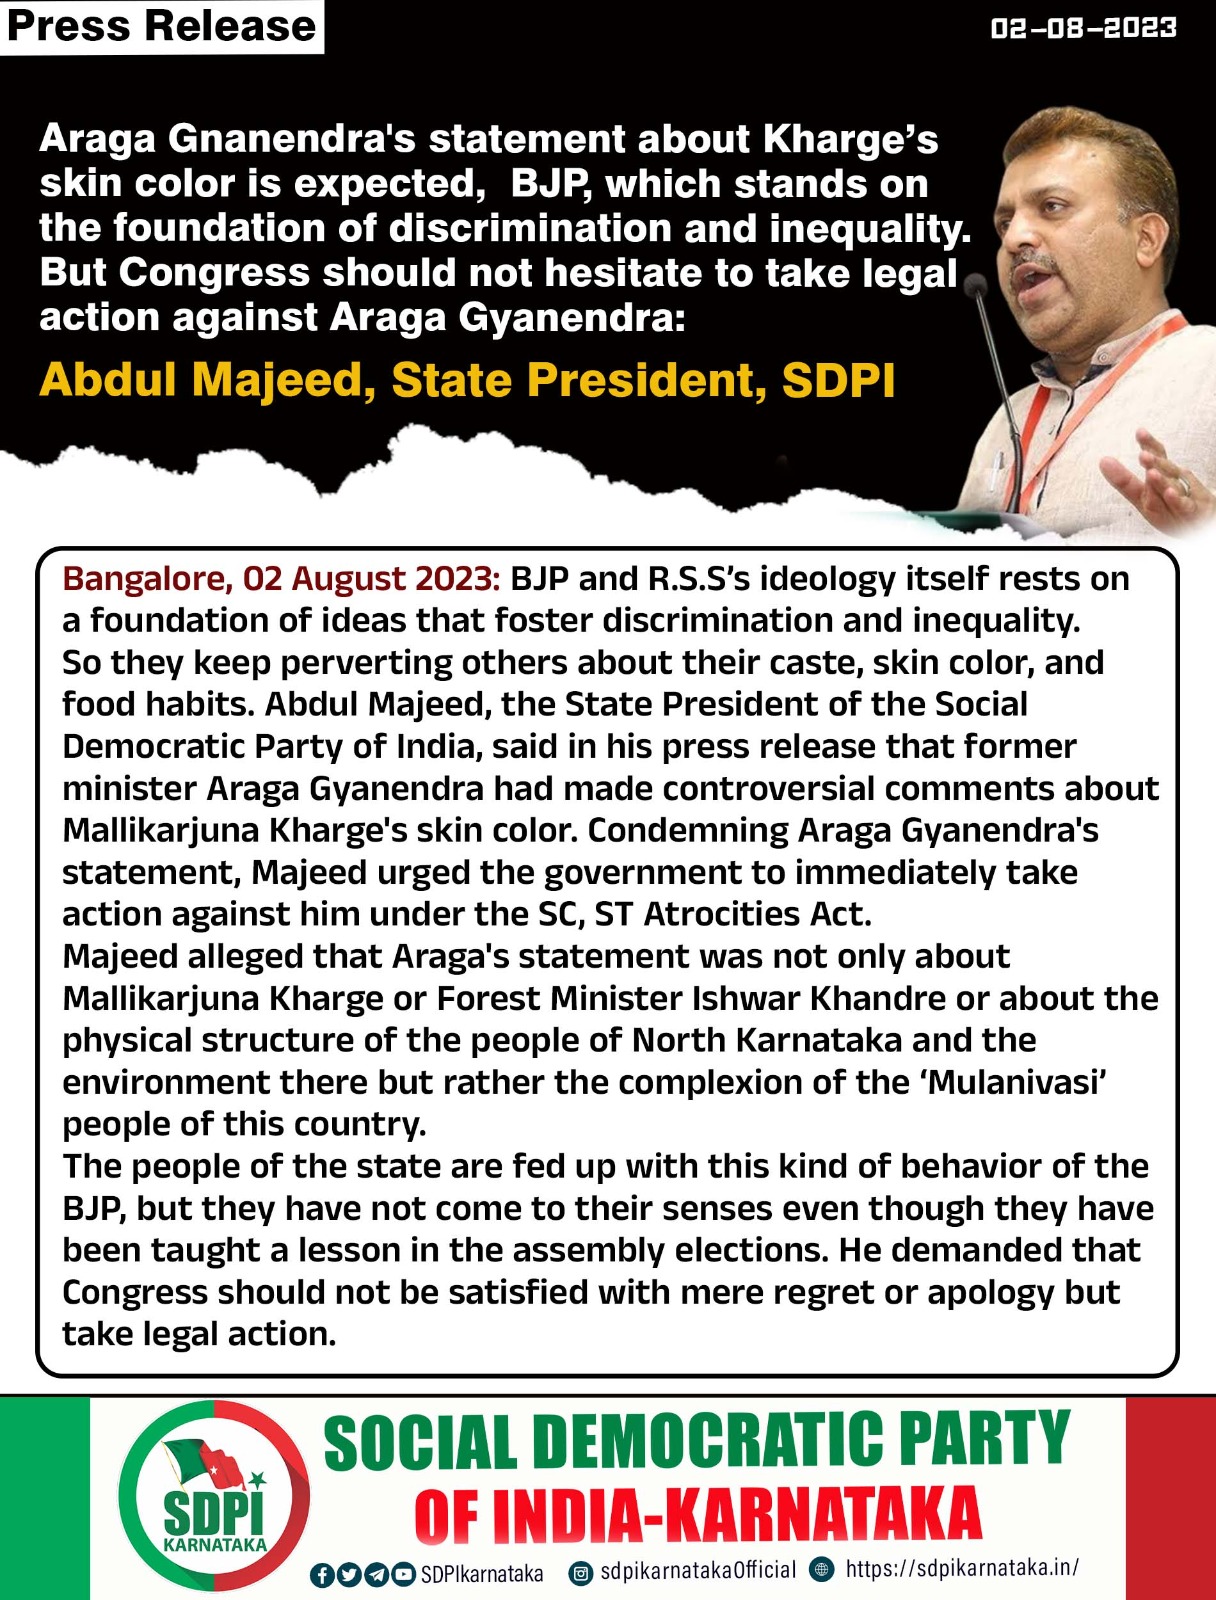 Araga Gnanendra’s statement about Kharge’s skin color is expected, BJP, which stands on the foundation of discrimination and inequality. But Congress should not hesitate to take legal action against Araga Gyanendra: Abdul Majeed, State President, SDPI.